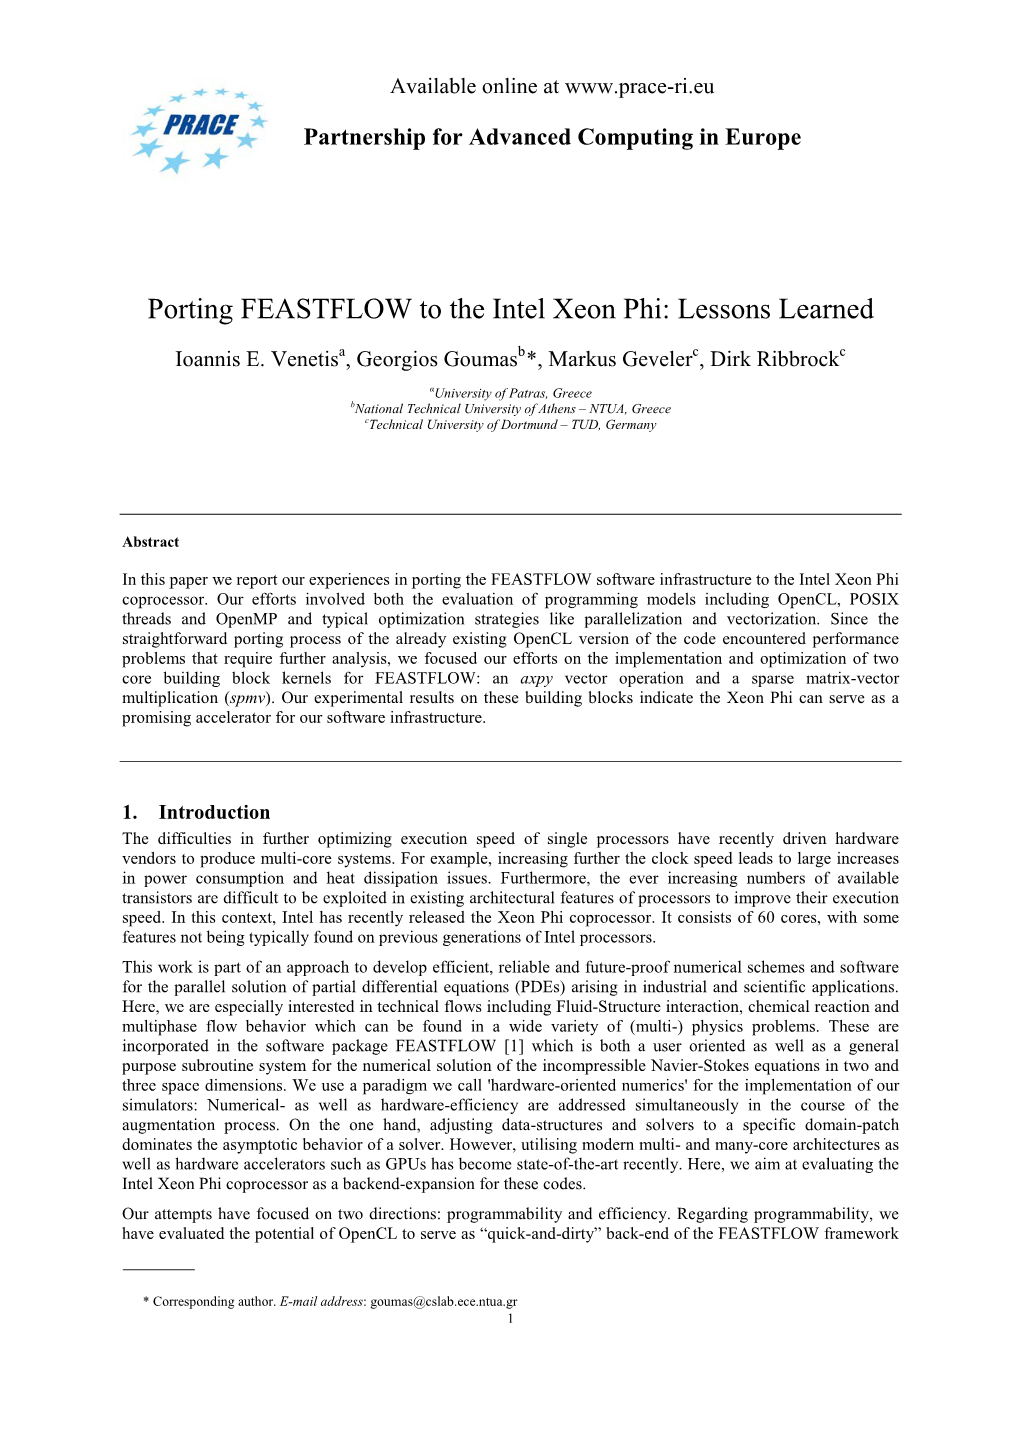 Porting FEASTFLOW to the Intel Xeon Phi: Lessons Learned